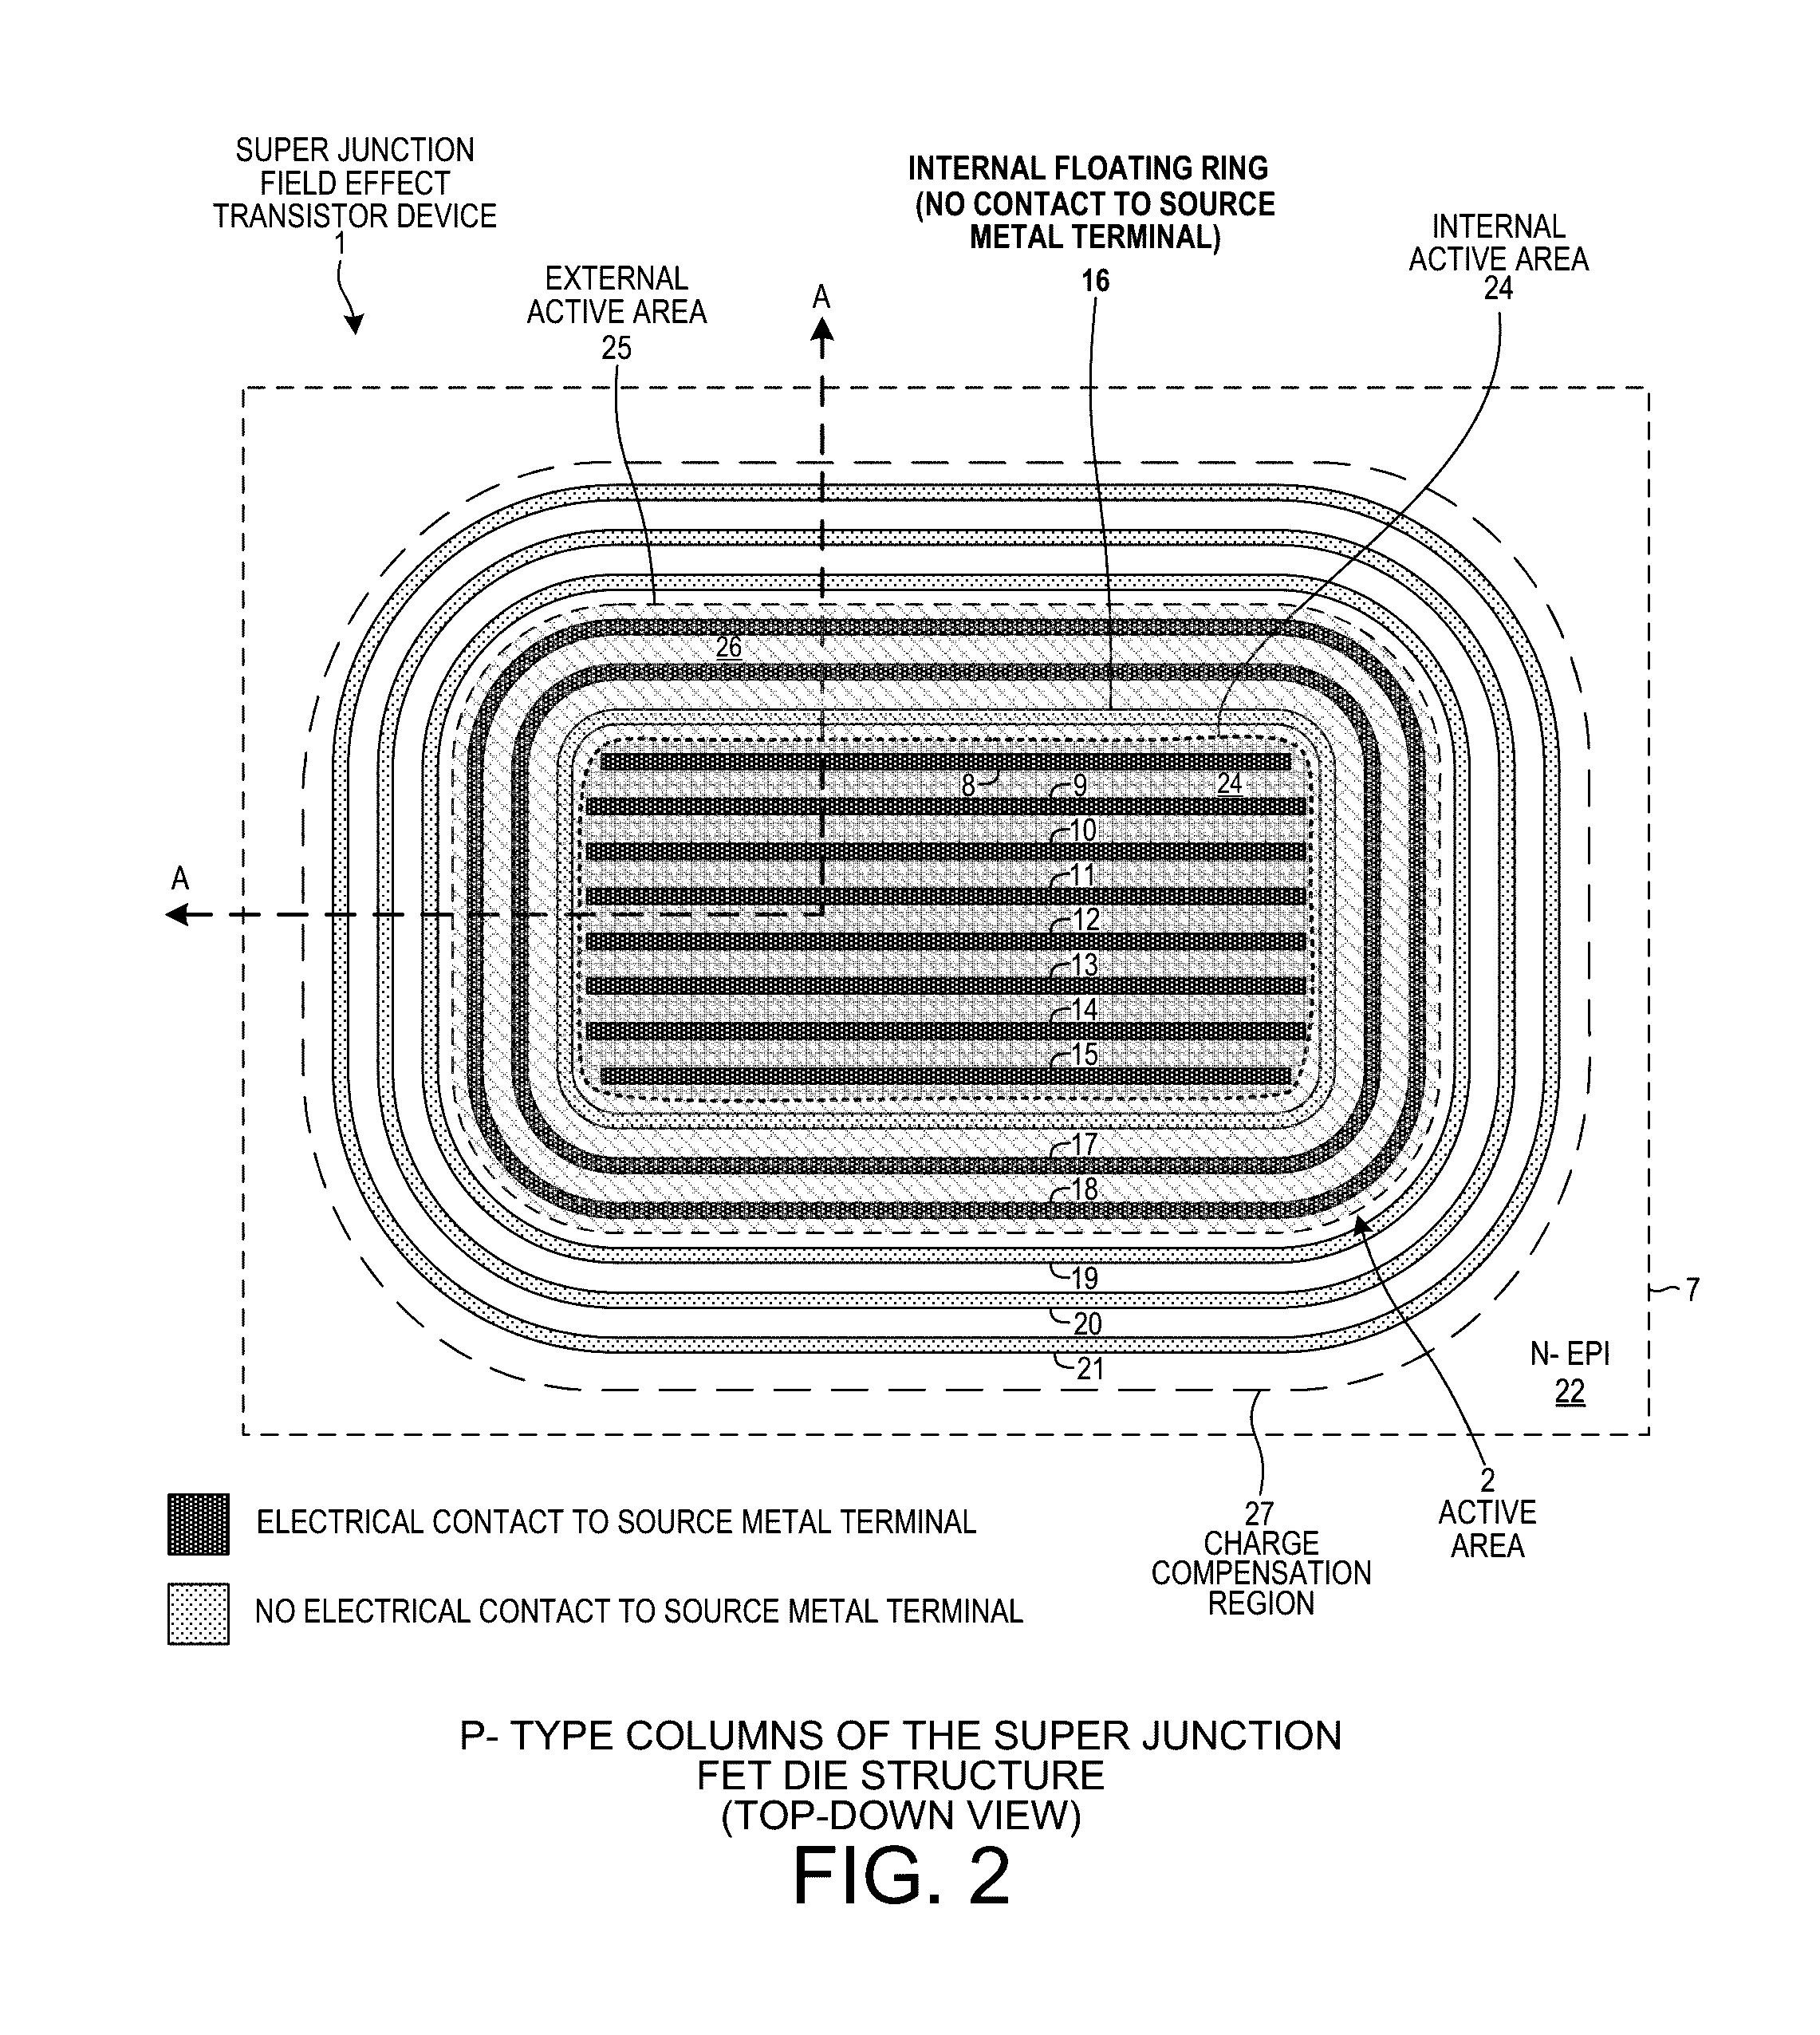 Super junction field effect transistor with internal floating ring